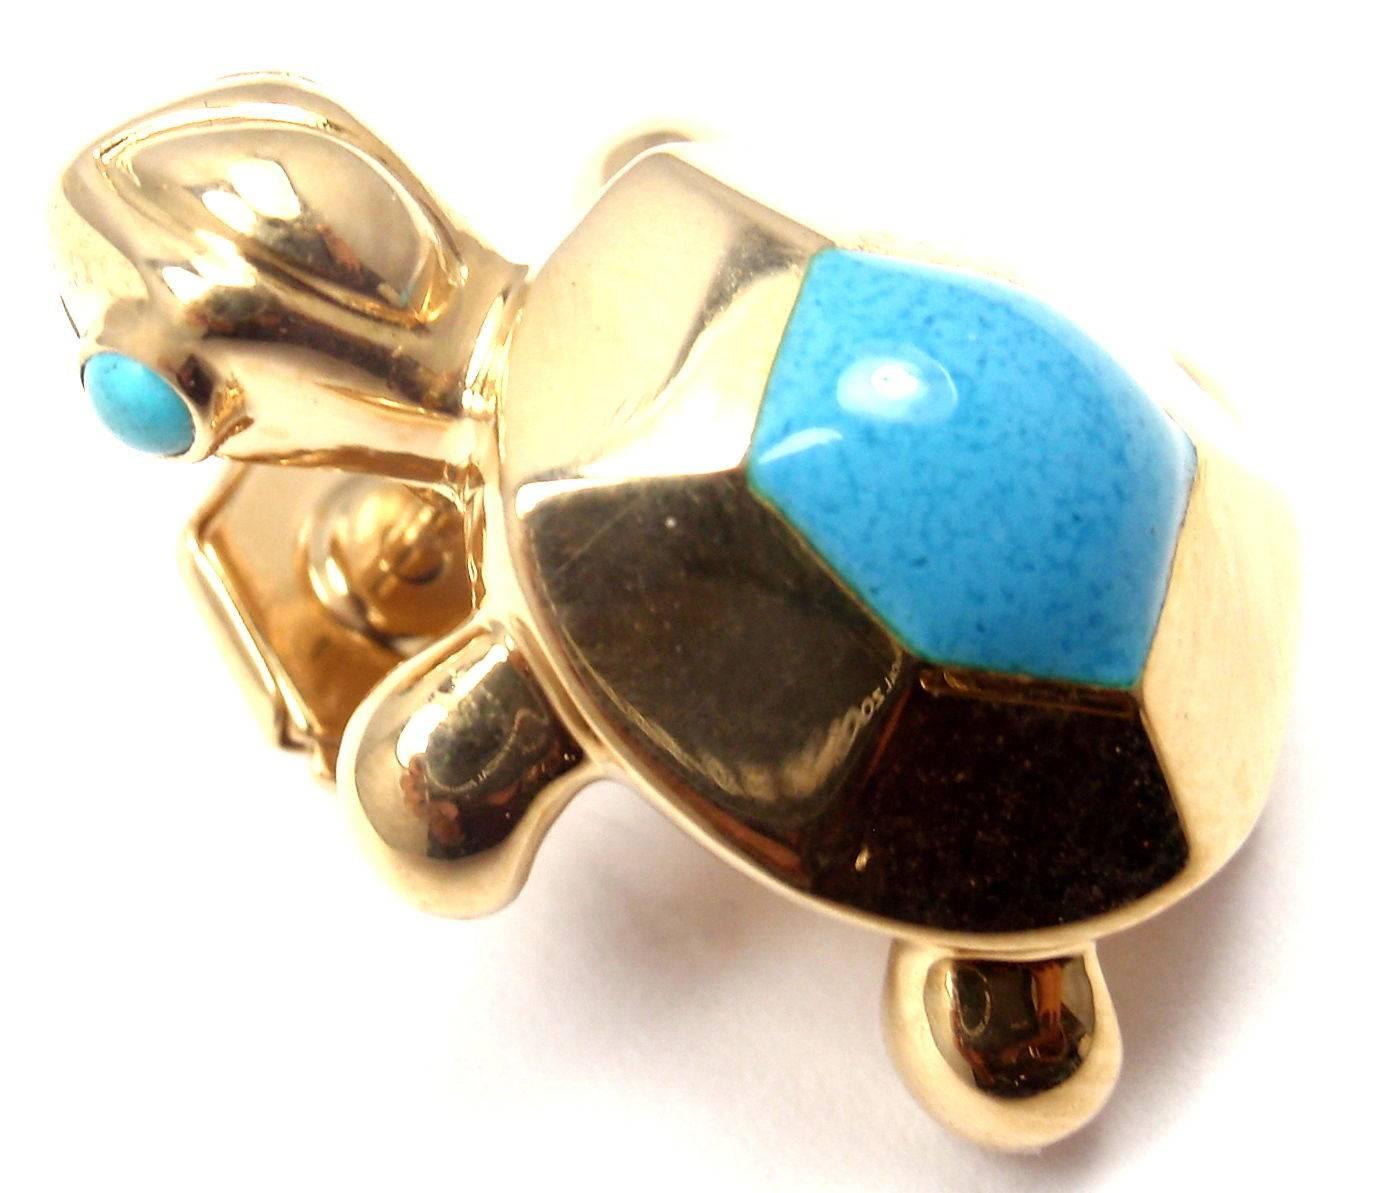 18k Yellow Gold Turquoise Turtle Tie Lapel Pin by Cartier. 
With 3 Turquoise stones.

Details: 
Measurements: 21mm x 15mm
Weight: 4.9 grams
Stamped Hallmarks: Cartier, 750, 1992, C8007
*Free Shipping within the United States*

YOUR PRICE: